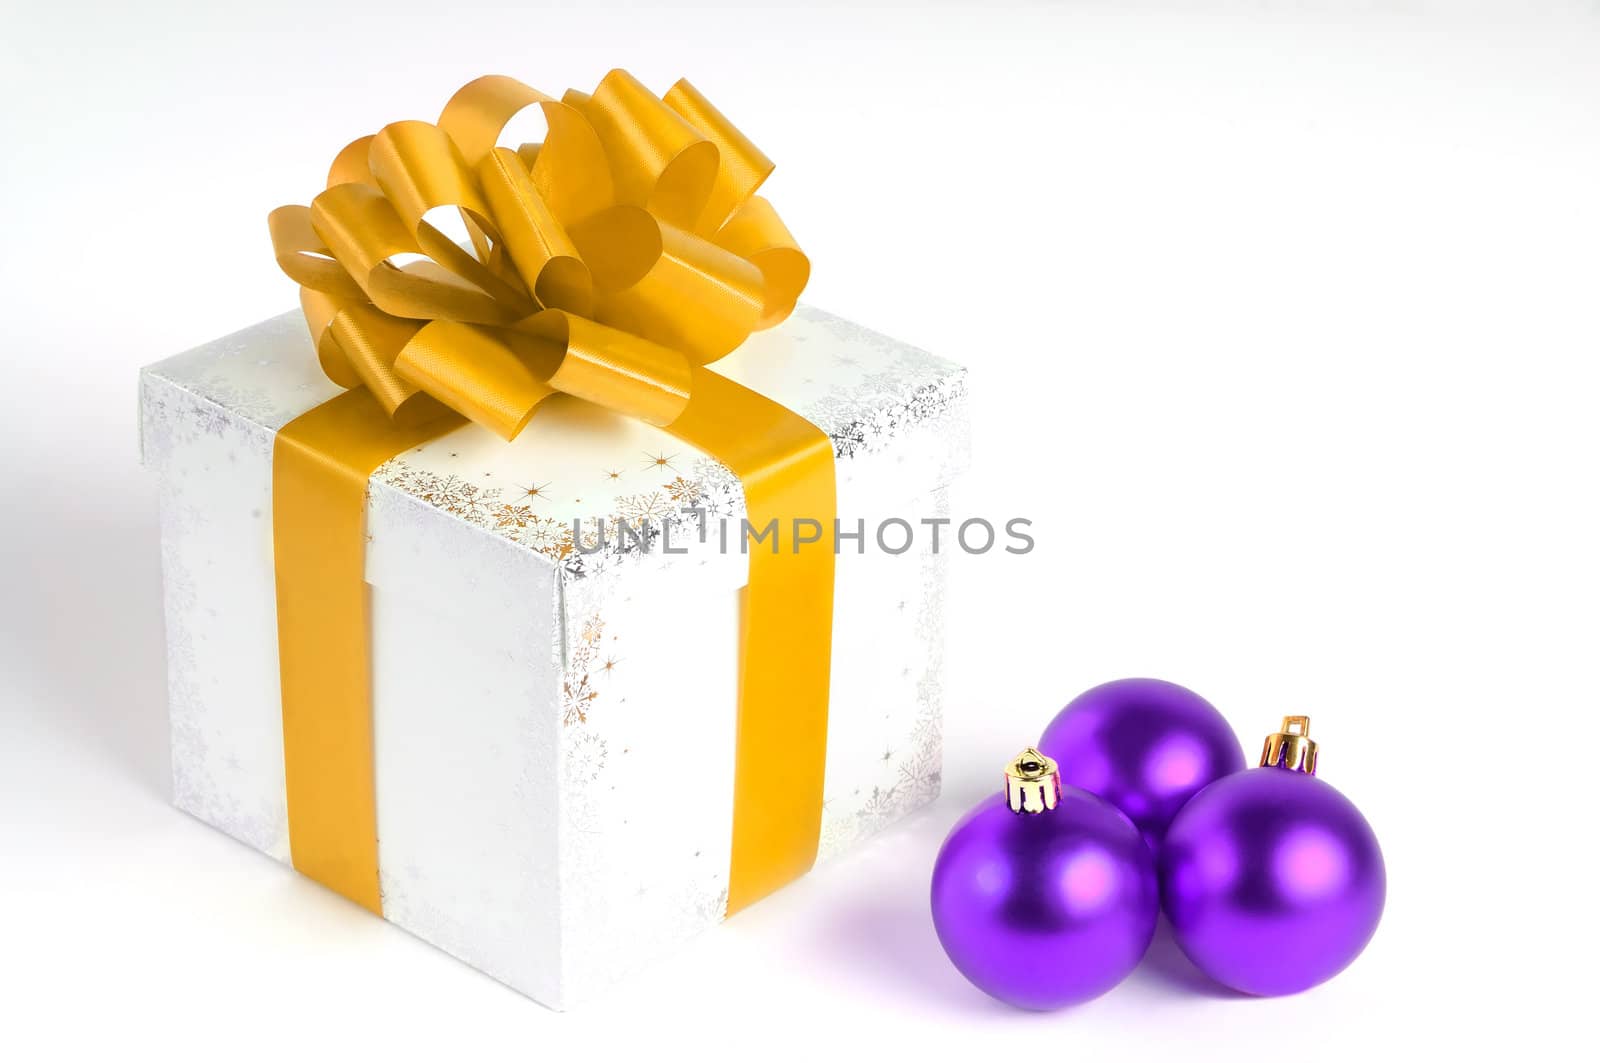 New year gift box isolated on white with Christmas balls, yellow and purple